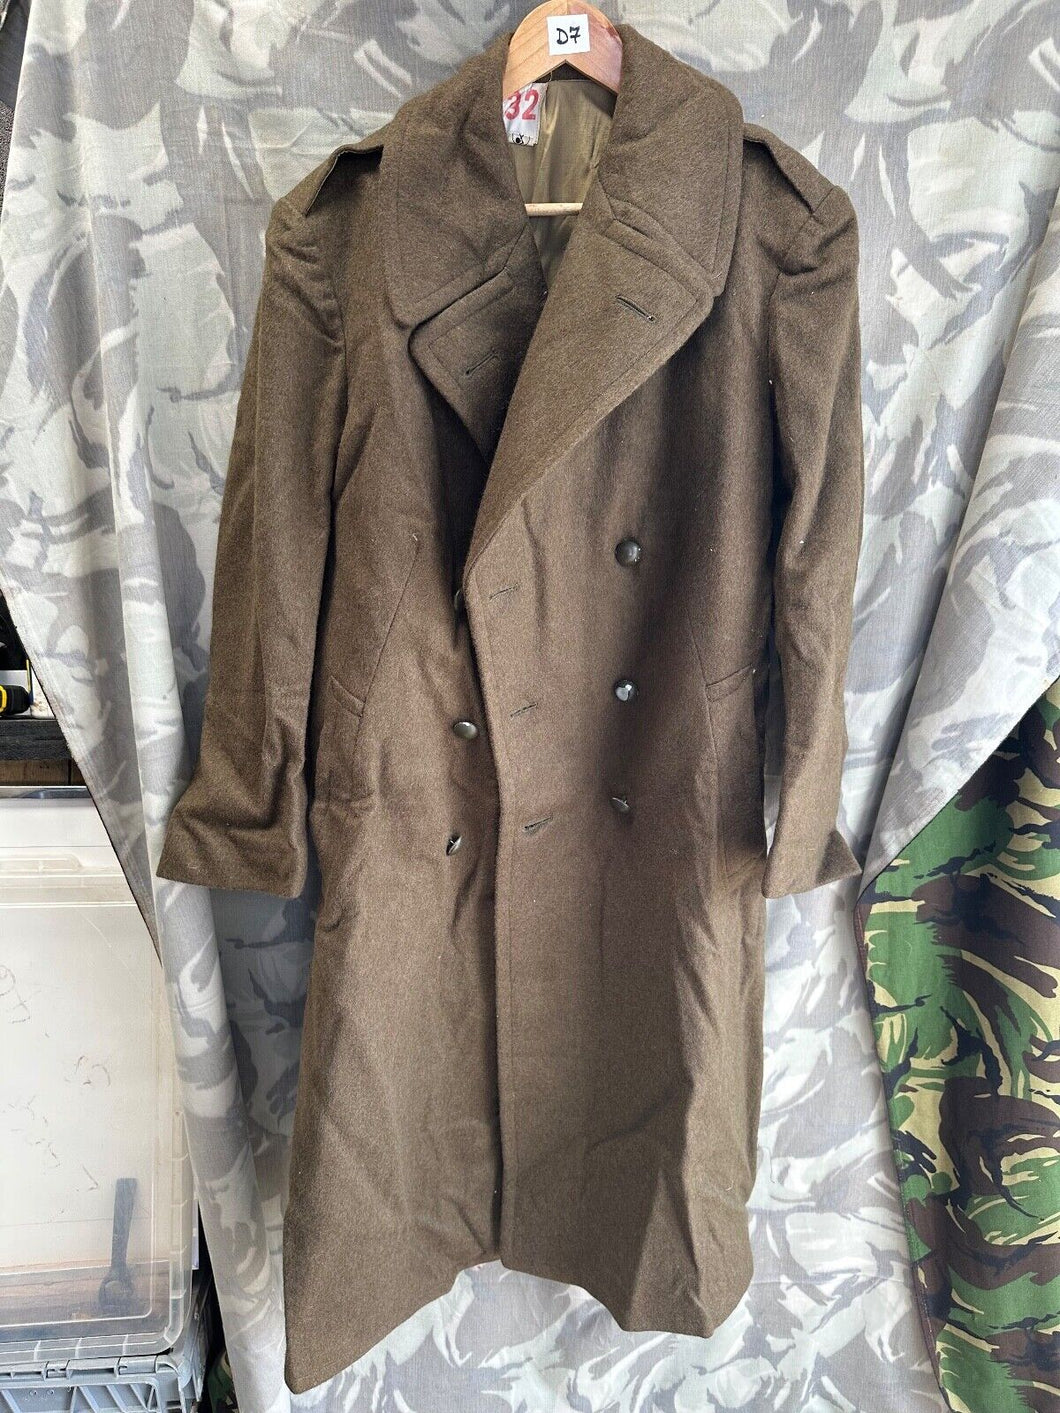 Genuine French Army Greatcoat - Ideal for WW2 US Army Reenactment